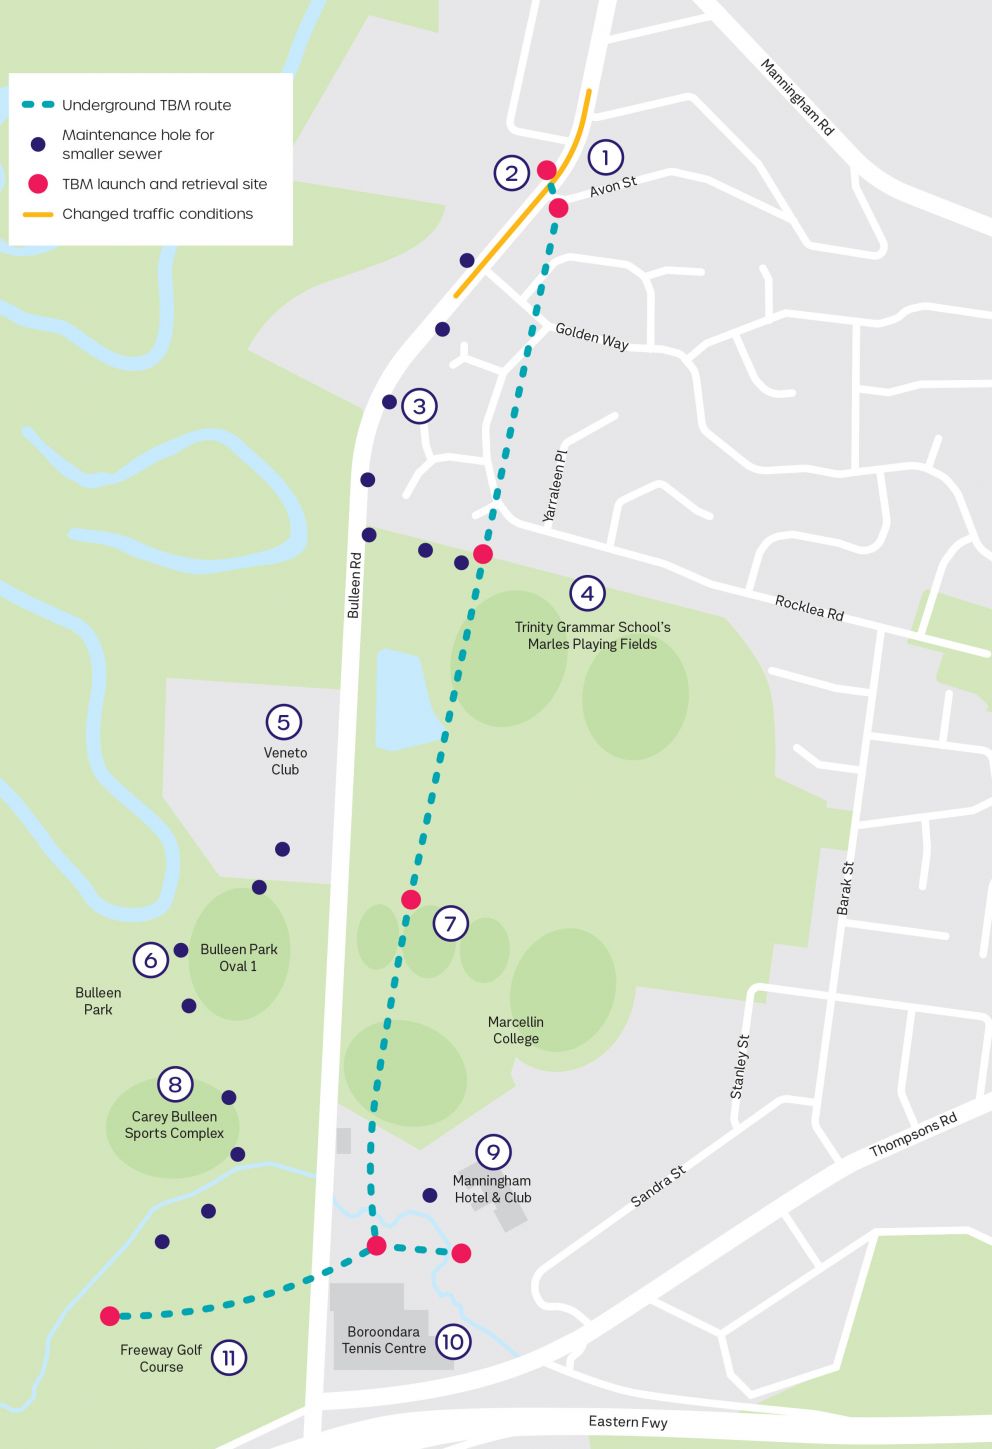 A map showing the locations of works on Bulleen Road, highlighting underground TBM route, maintenance hole for smaller sewer, TBM launch and retrieval site and changed traffic conditions.